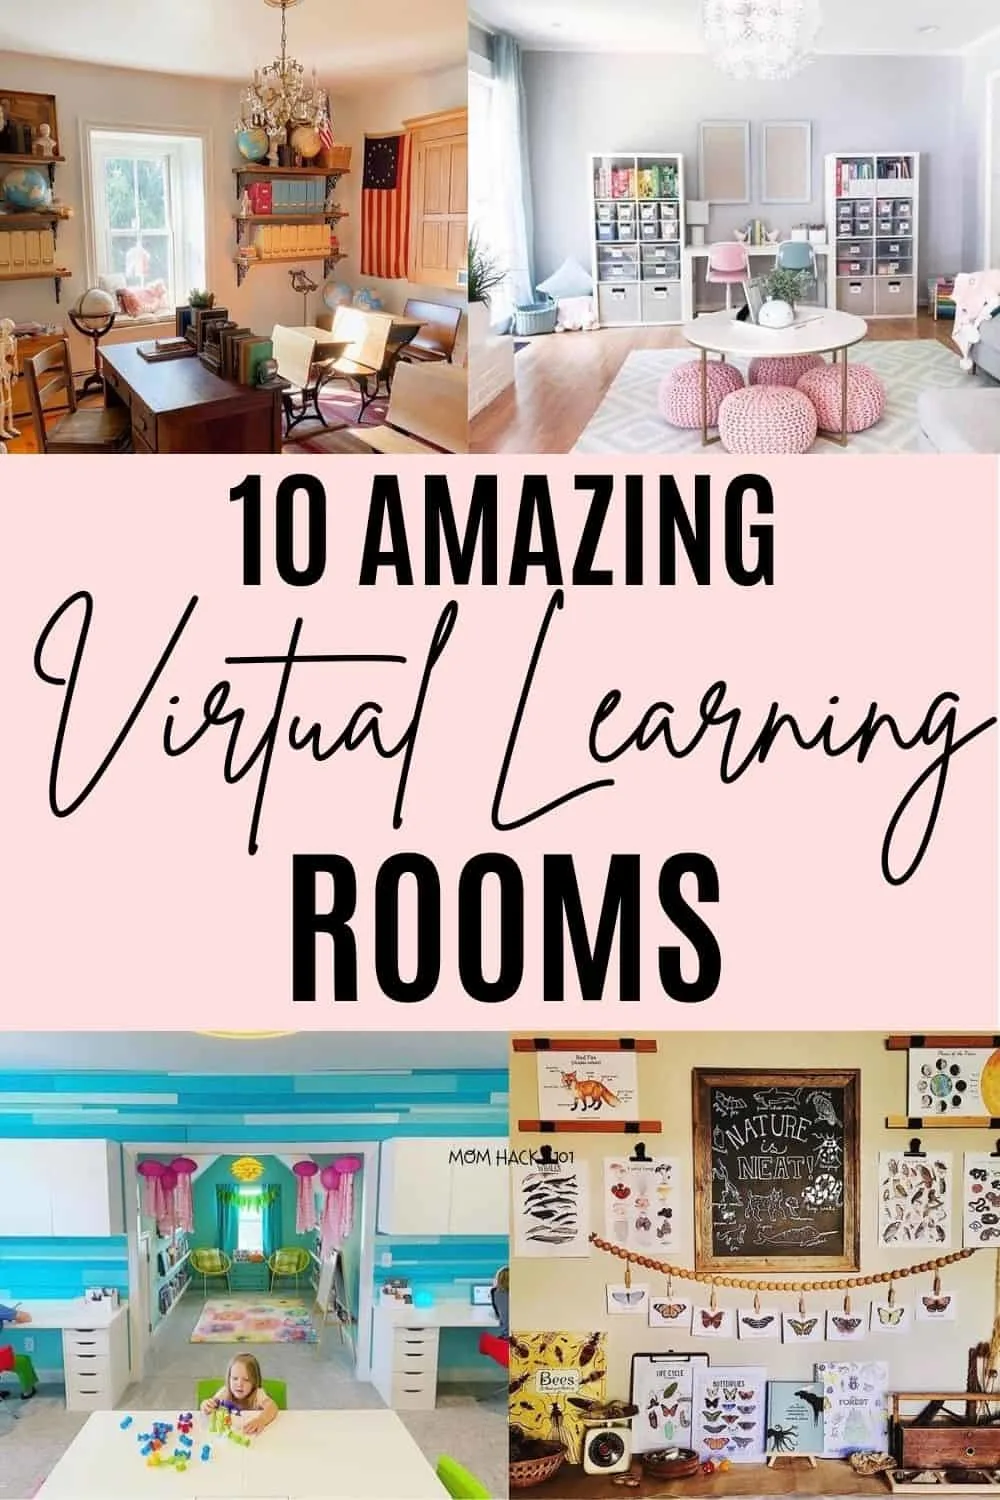 Virtual Learning rooms